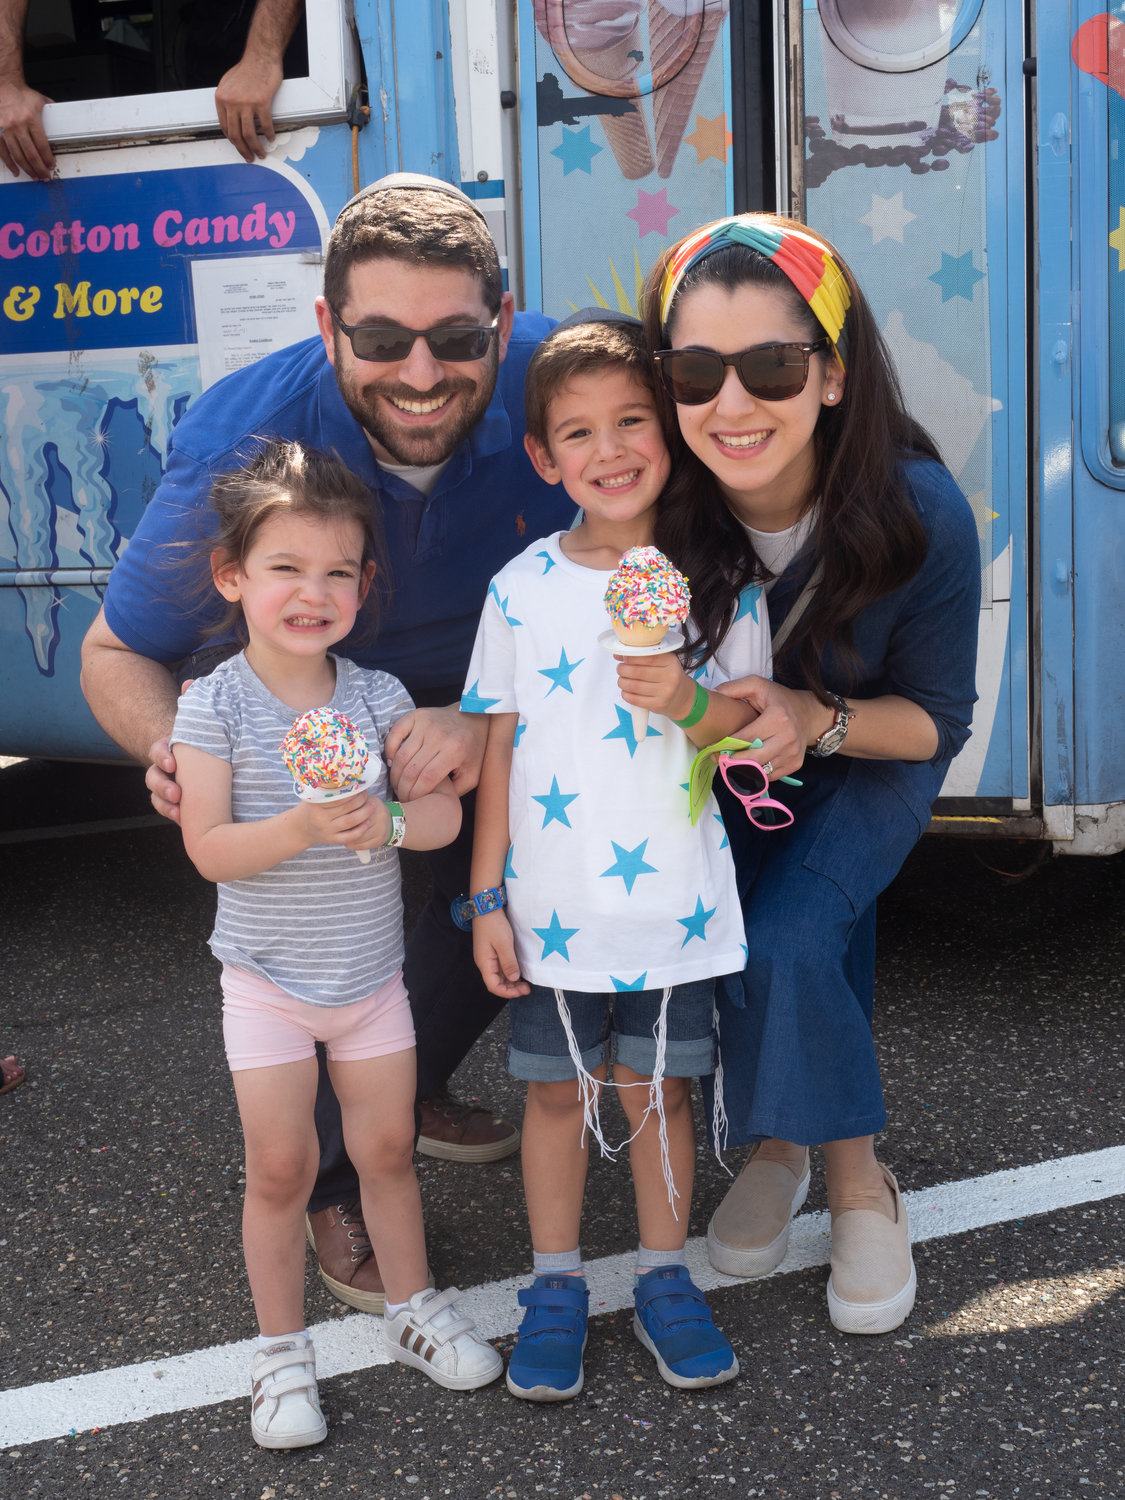 Ice cream was the treat for Zahava, 2, and Meir, 4, Weinstein with parents Yaakov and Davora at the fall festival.